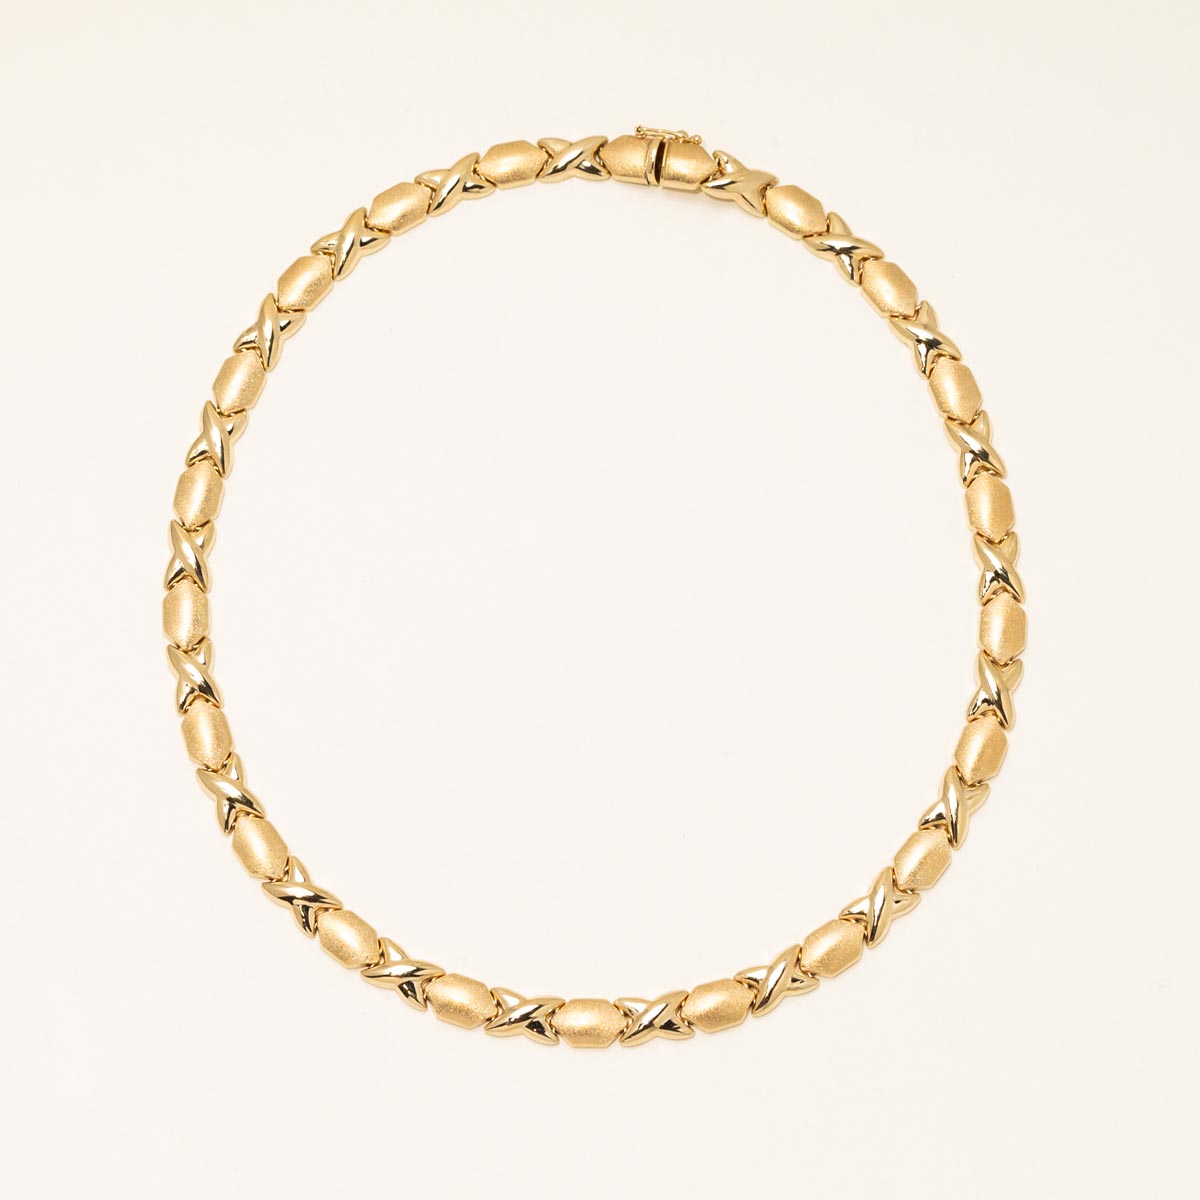 Estate X O Link Necklace in 14kt Yellow Gold (16 inches)